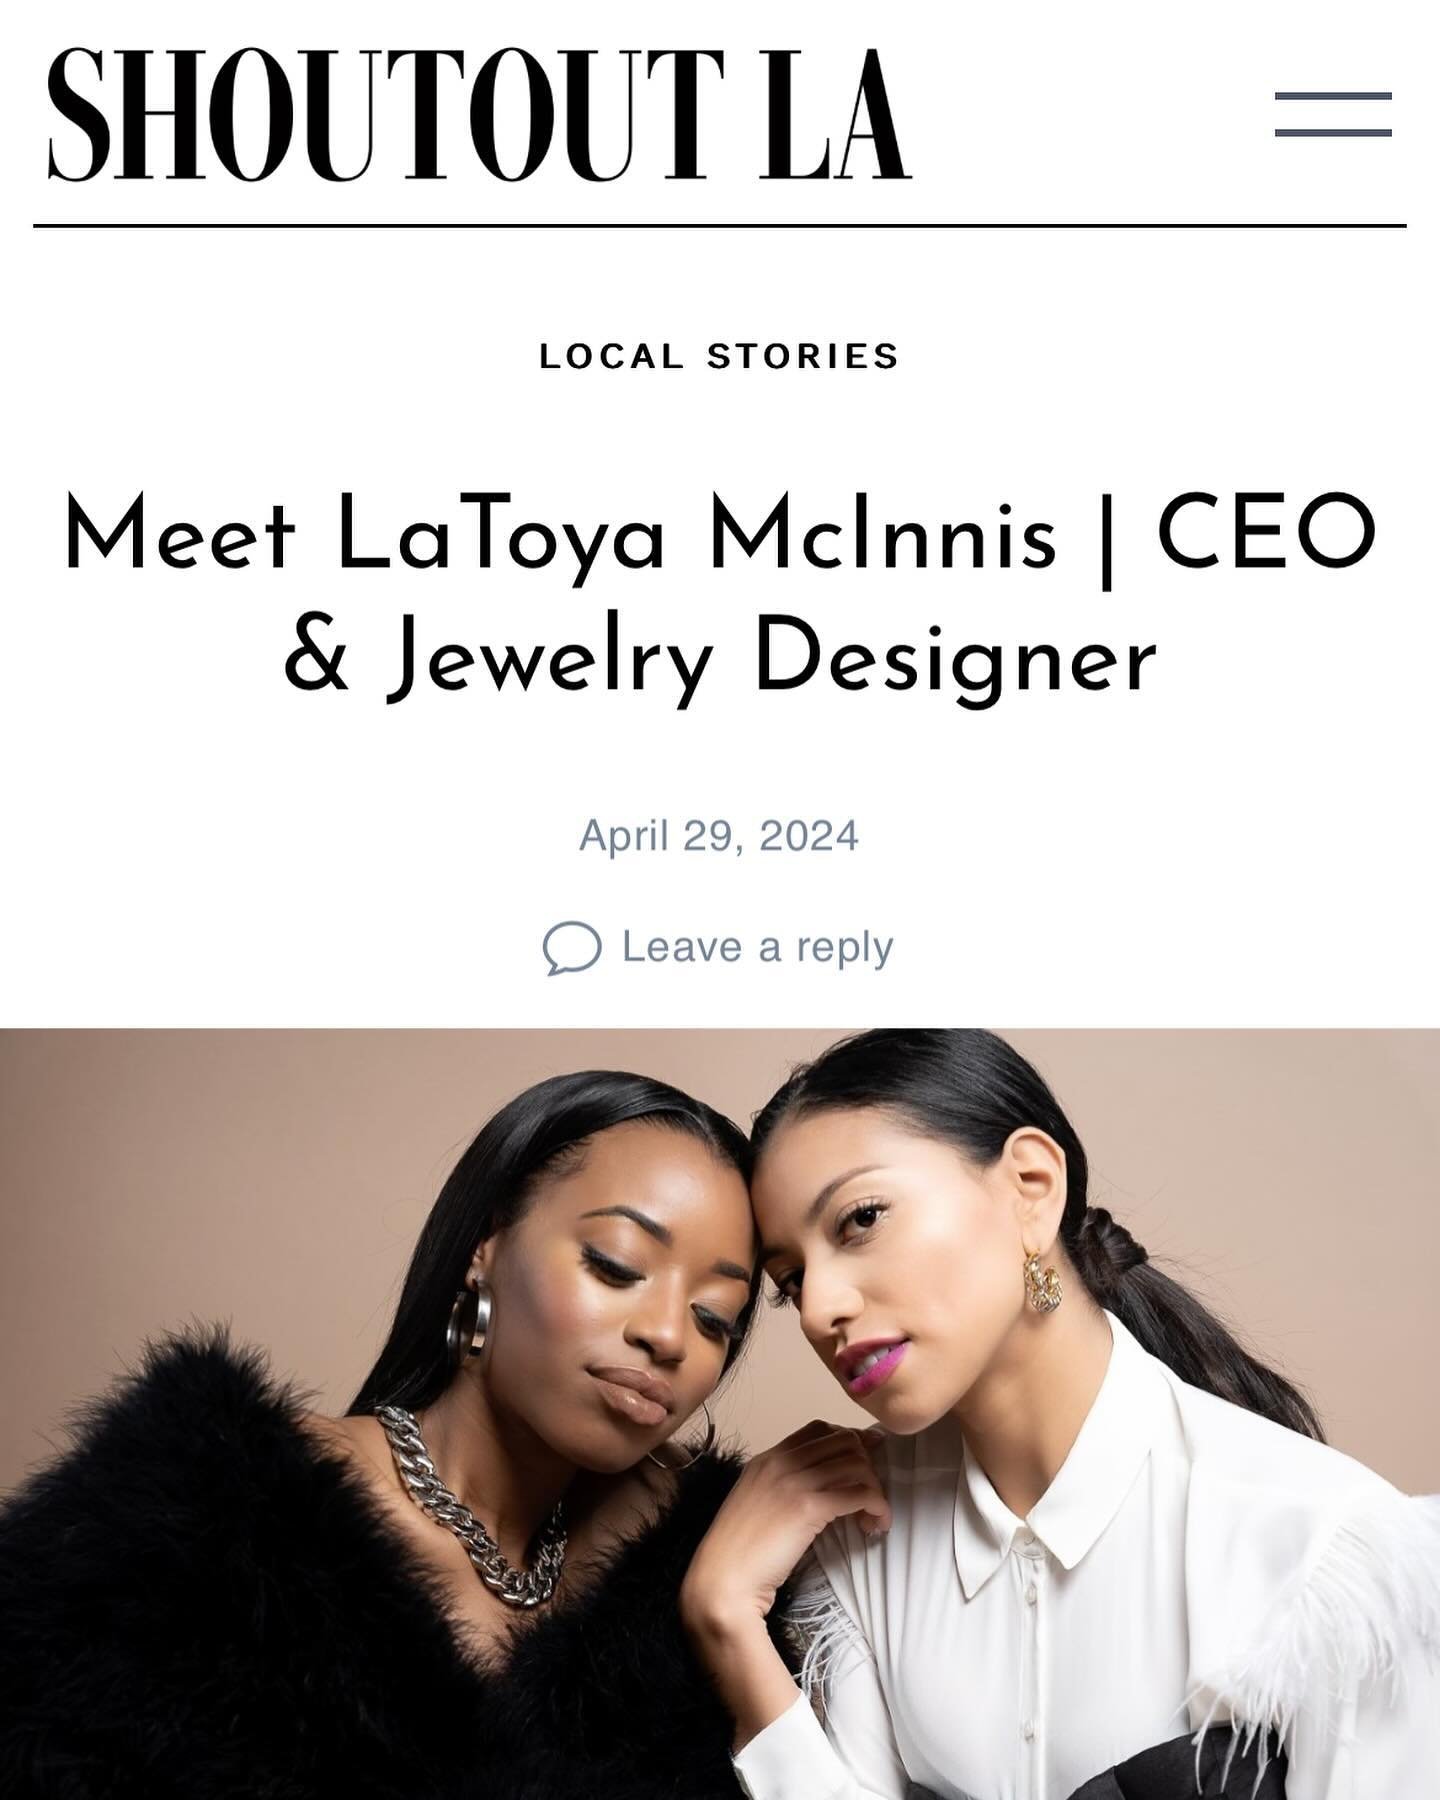 💗NEW FEATURE! THANK YOU @shoutoutlaofficial for capturing a glimpse into my journey as a Jewelry Designer!  We don&rsquo;t often get to share how our journeys began but I&rsquo;m grateful for platforms like #shoutoutla that invest in highlighting an